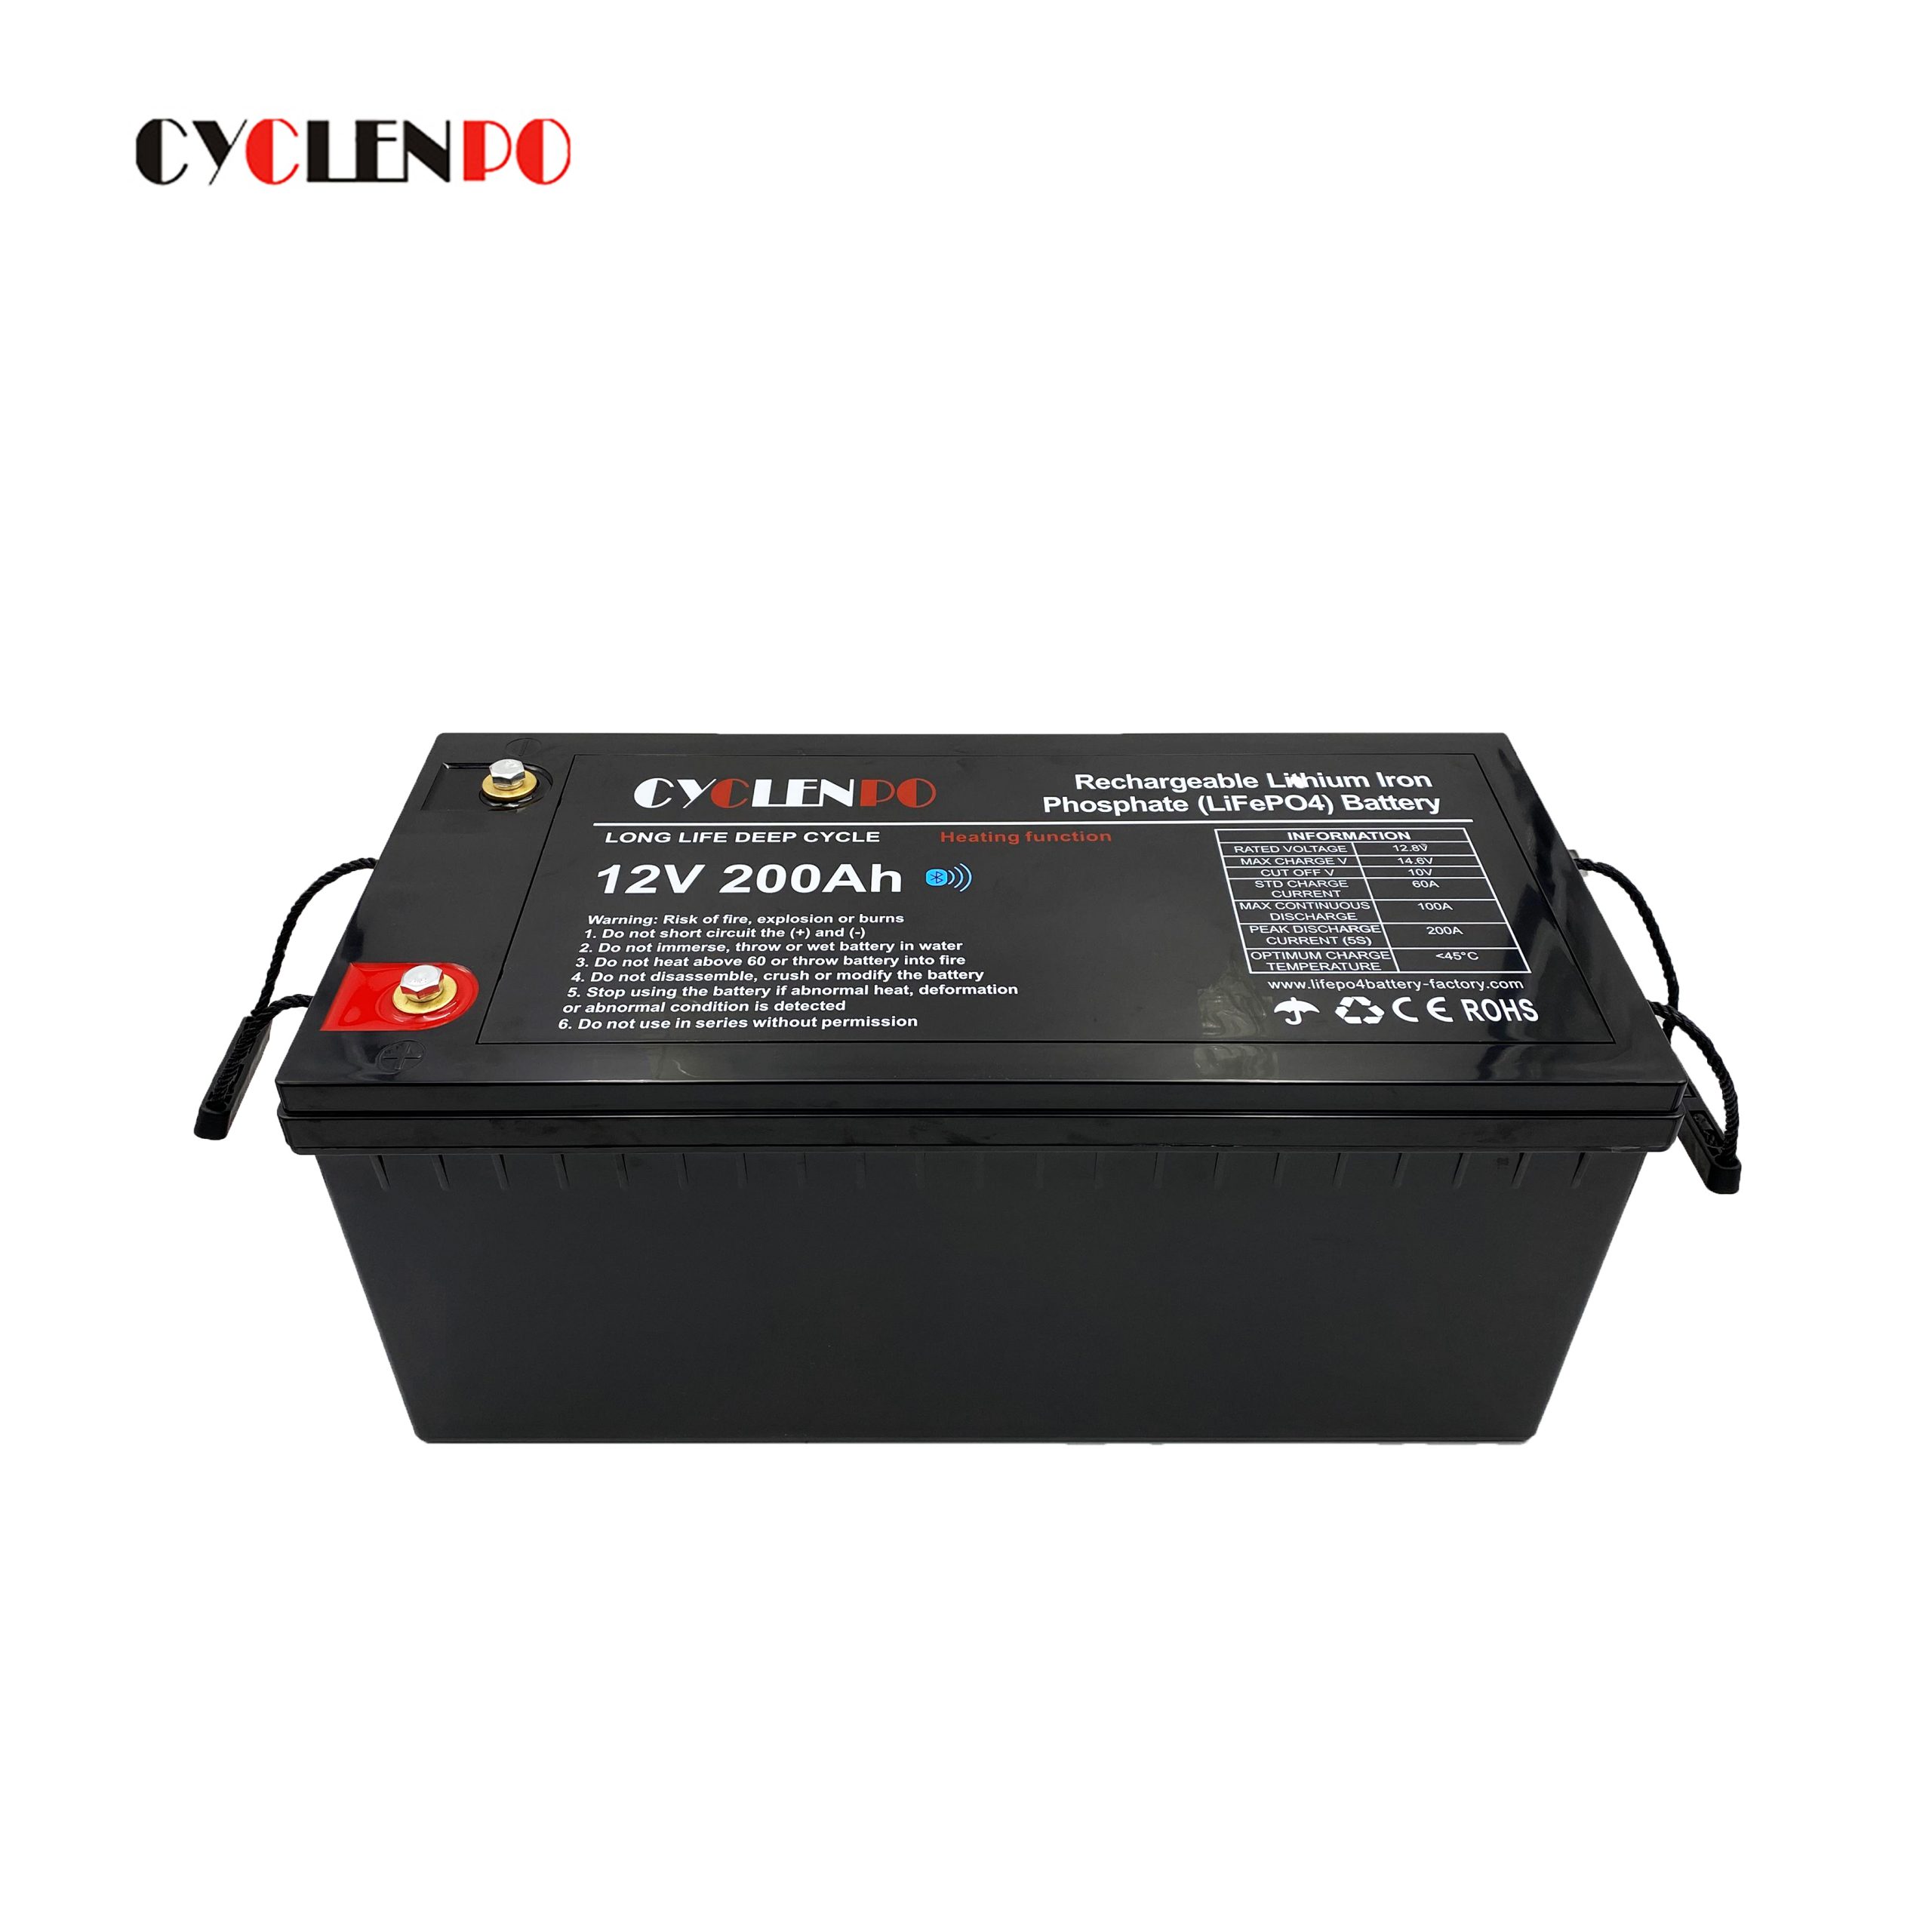 Factory 12v 200ah lifepo4 battery for home energy storage